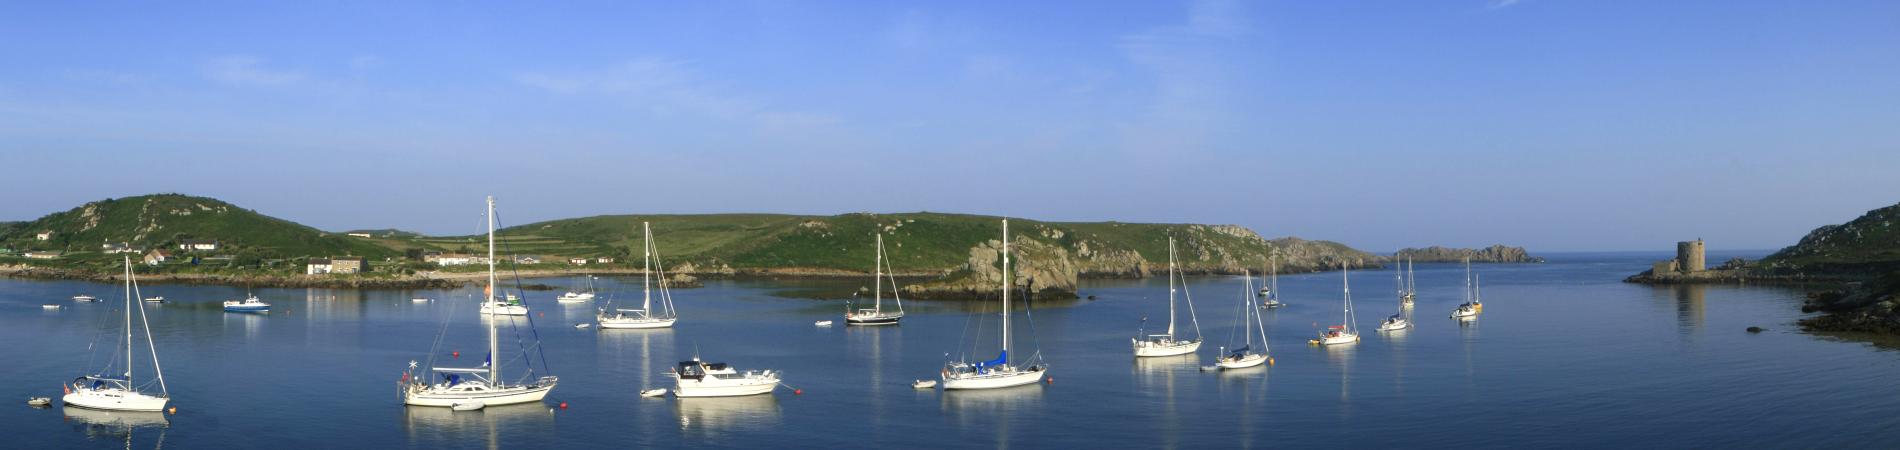 Image for Three Things to do on the Isles of Scilly